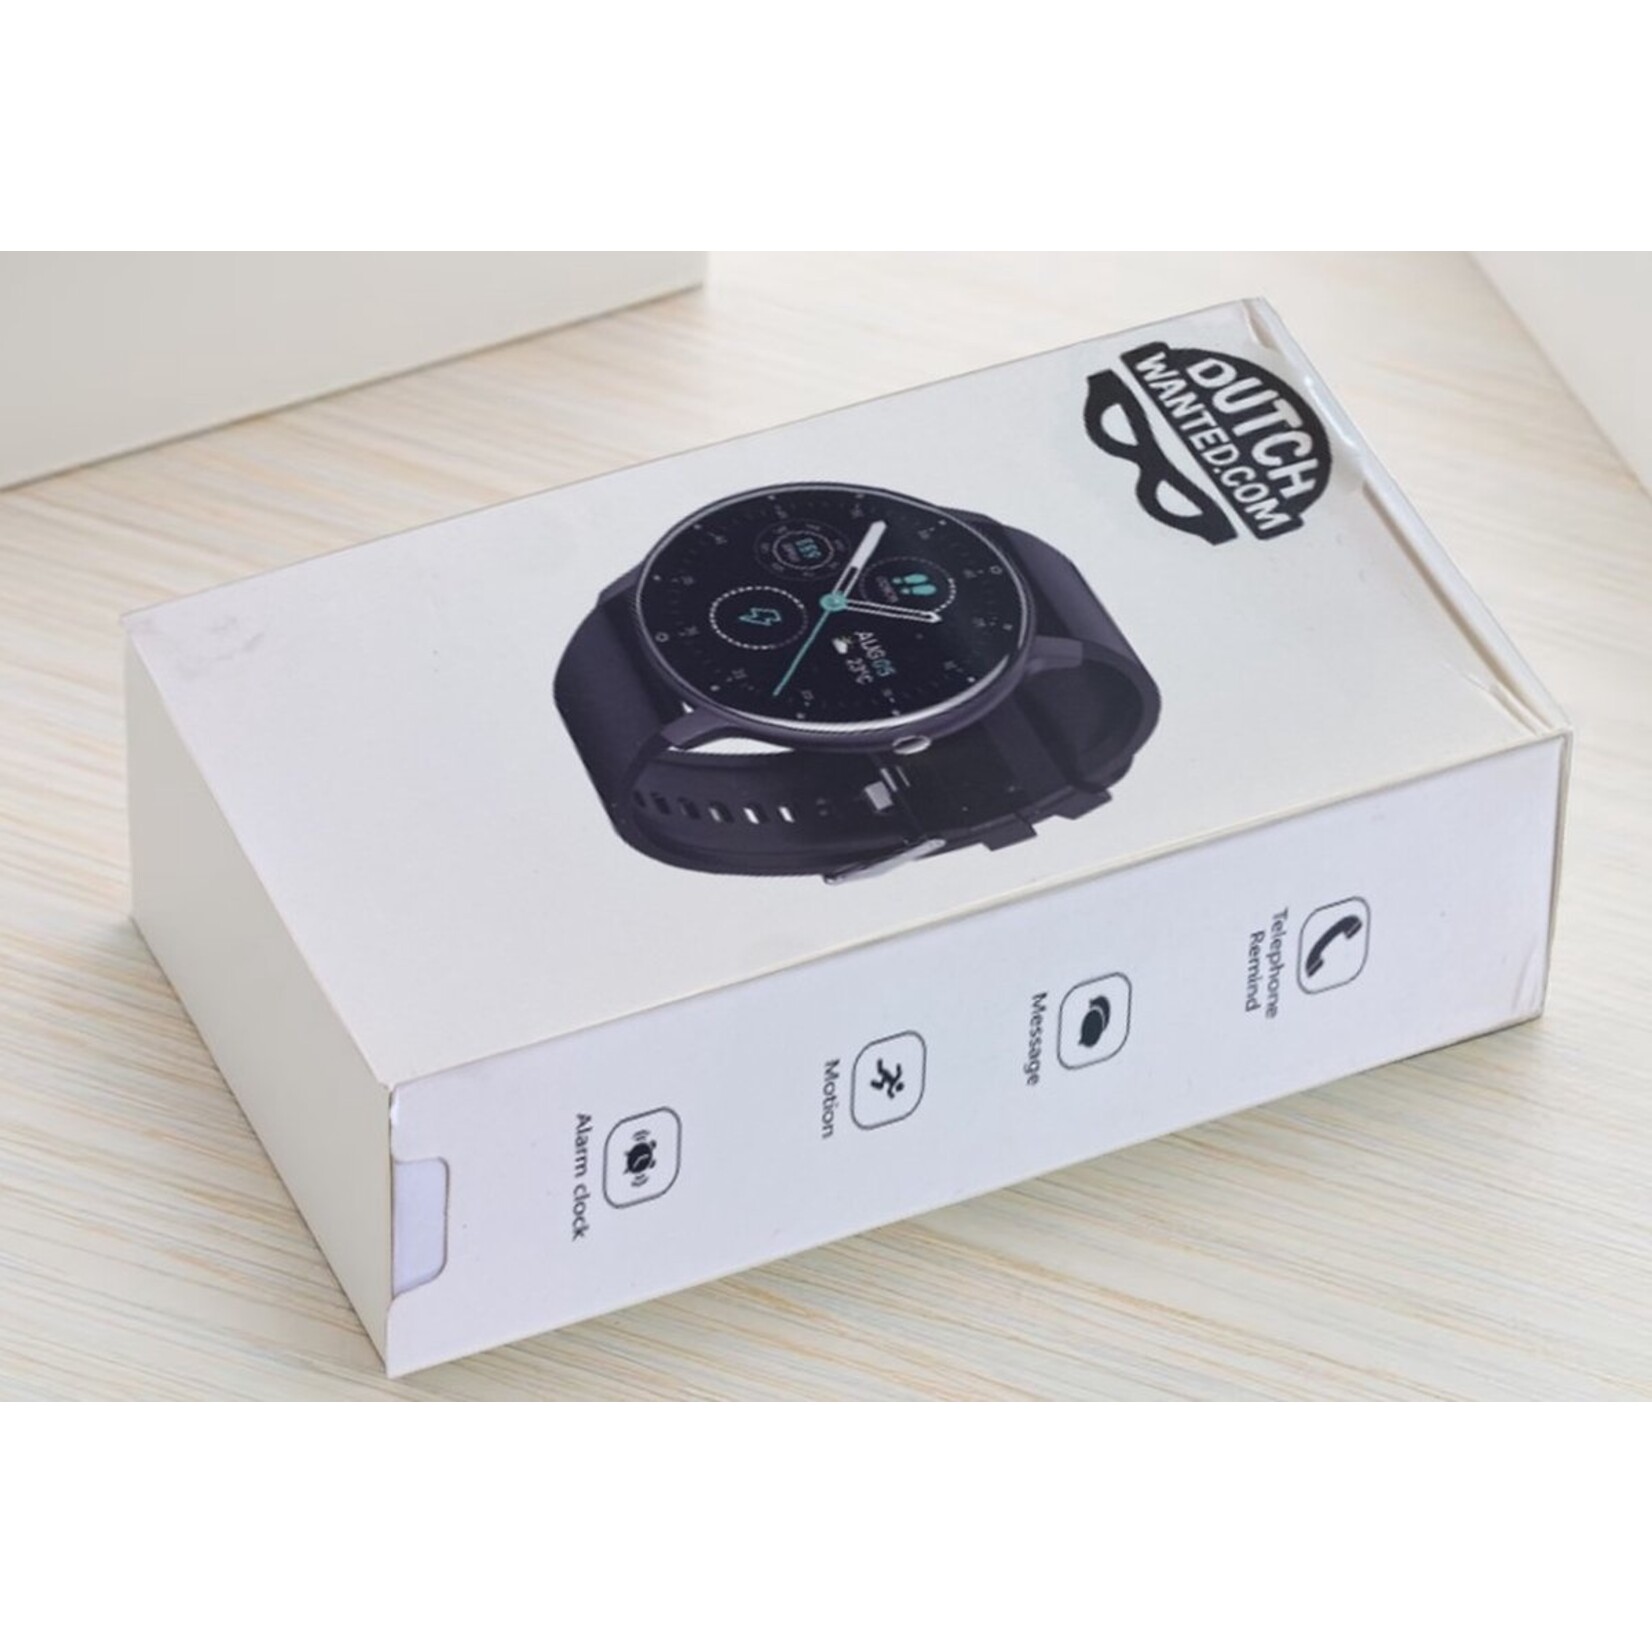 Dutch Wanted DutchWanted - PowerForce Smartwatch - 46mm - For Women and Men - Pedometer - Sleep Meter - IOS and Android - Black